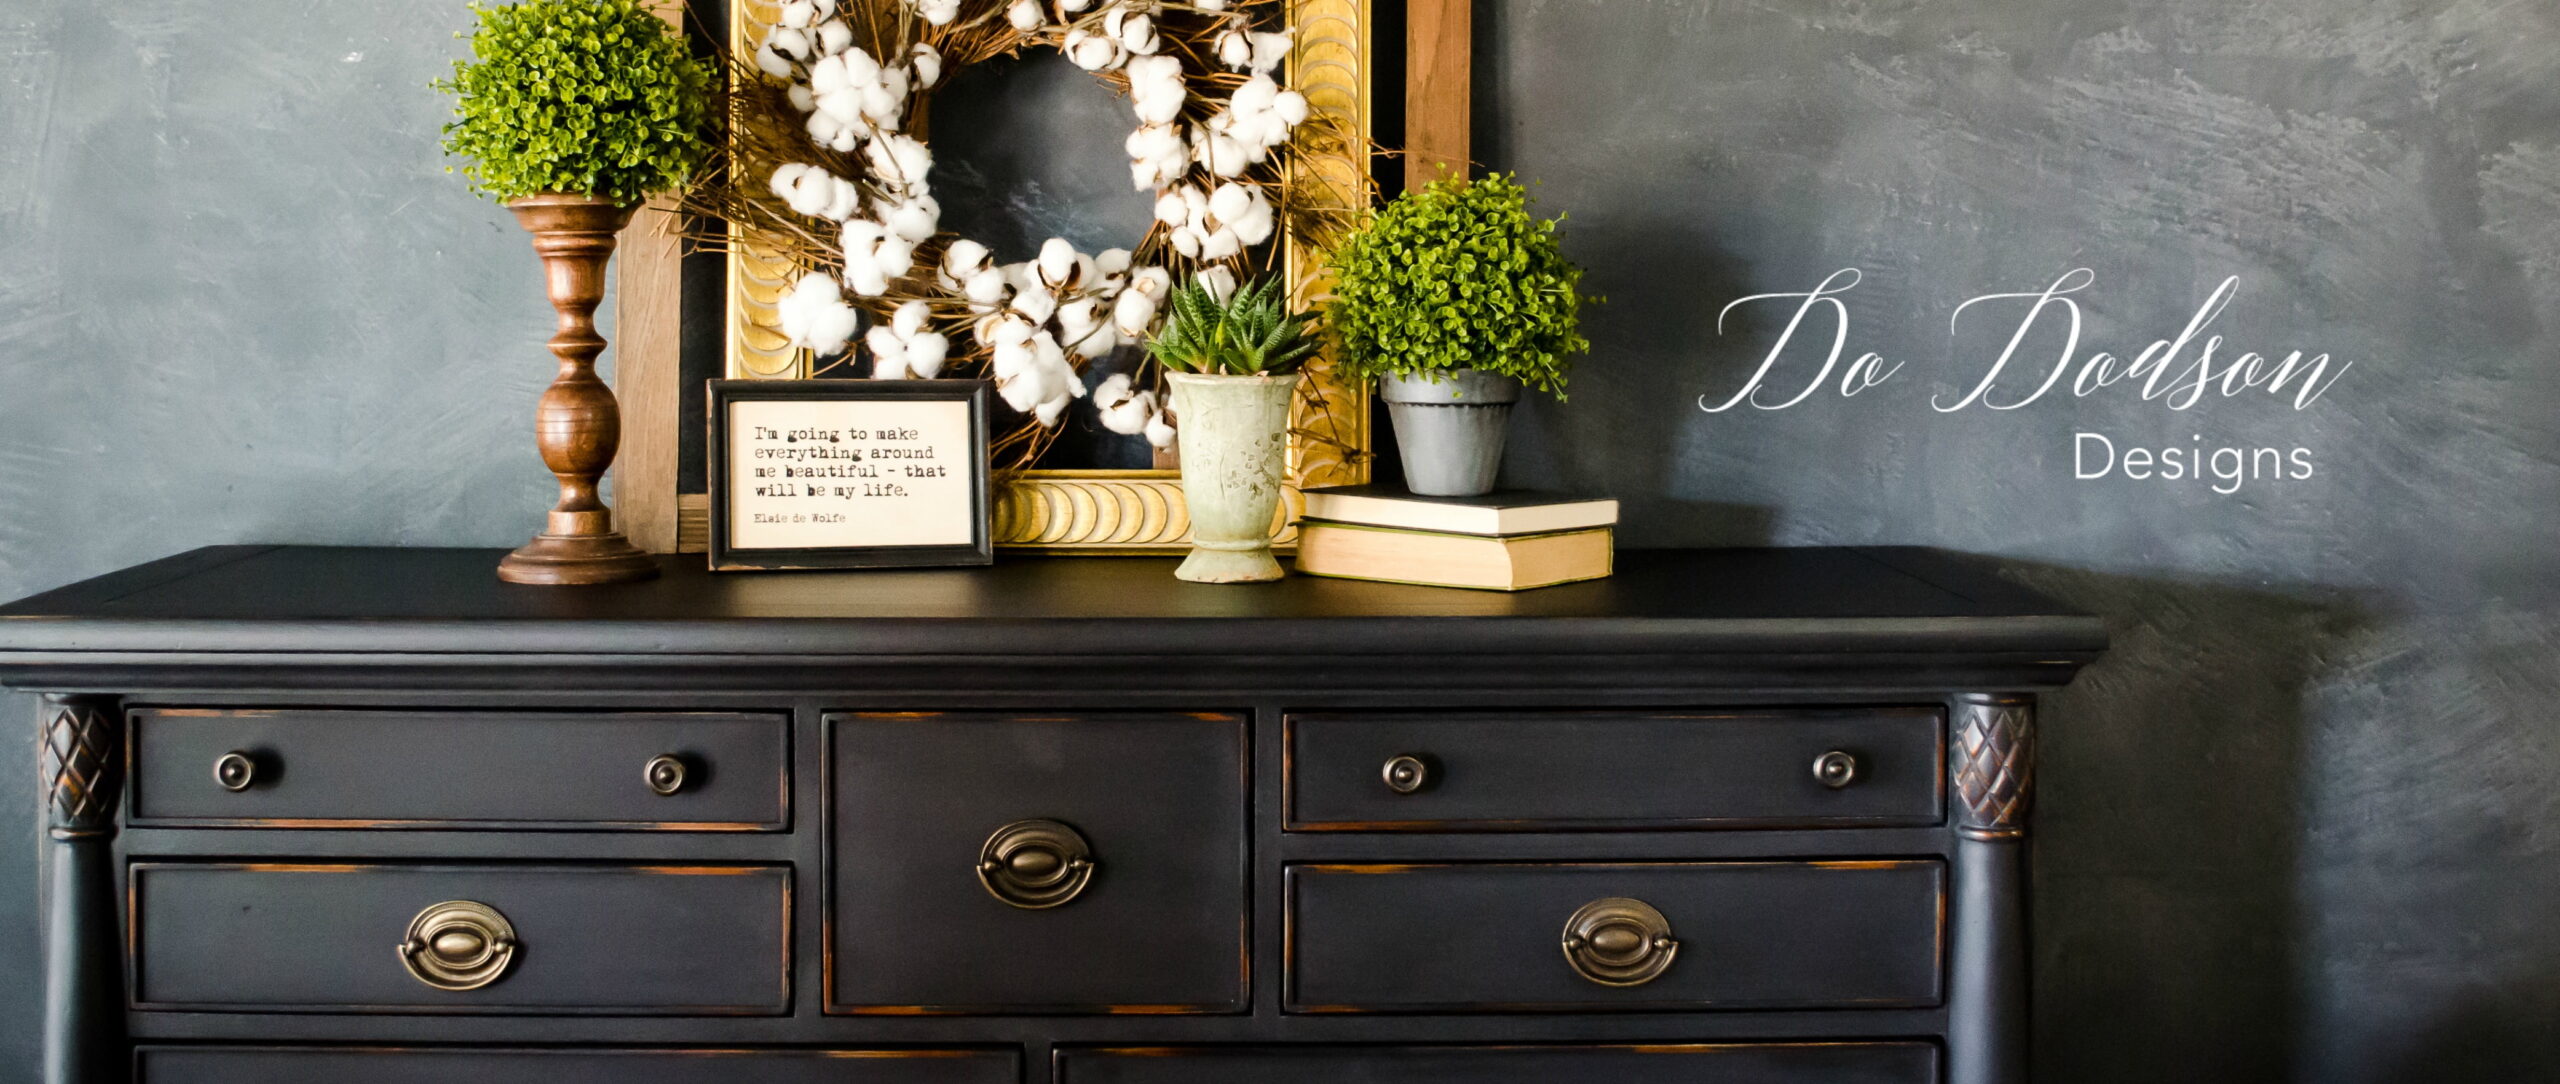 Quick And Easy Black Wax Furniture Makeover - Do Dodson Designs